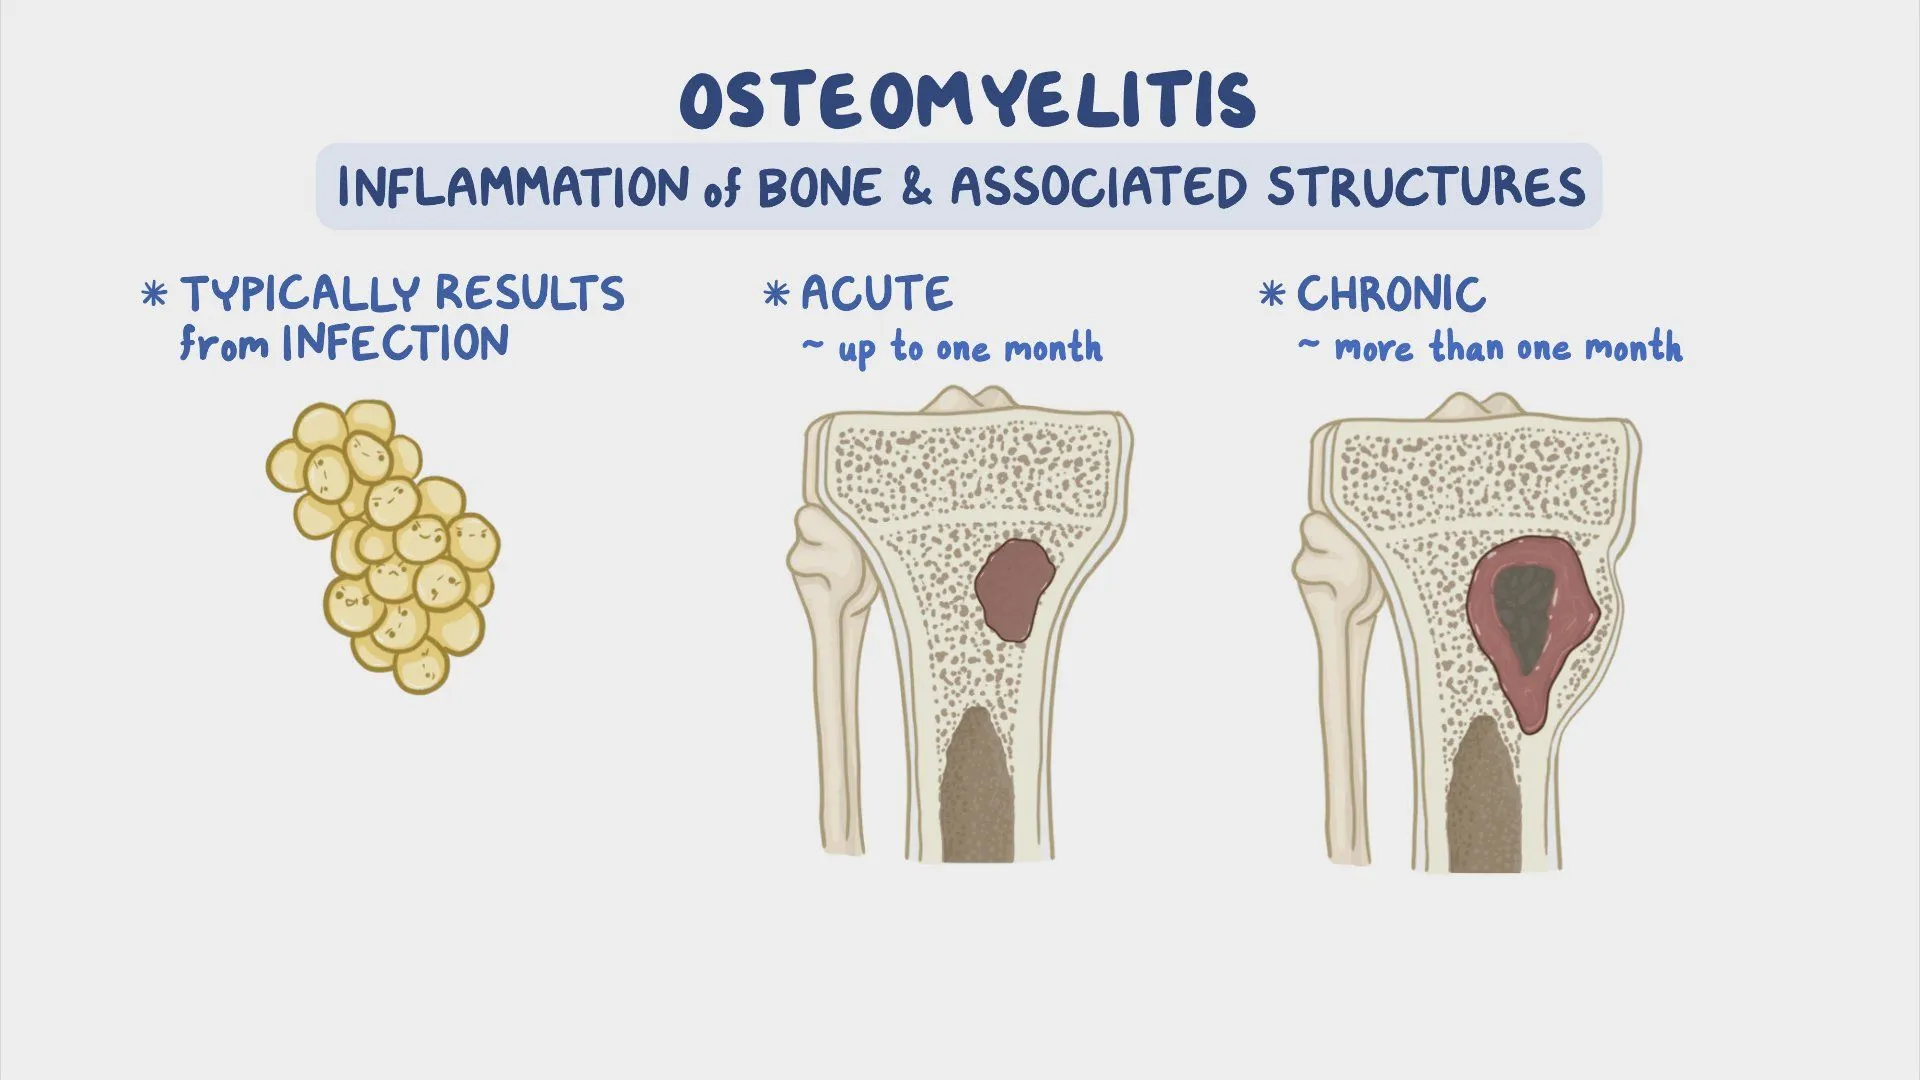 What Is Osteomyelitis, And What Are The Symptoms?